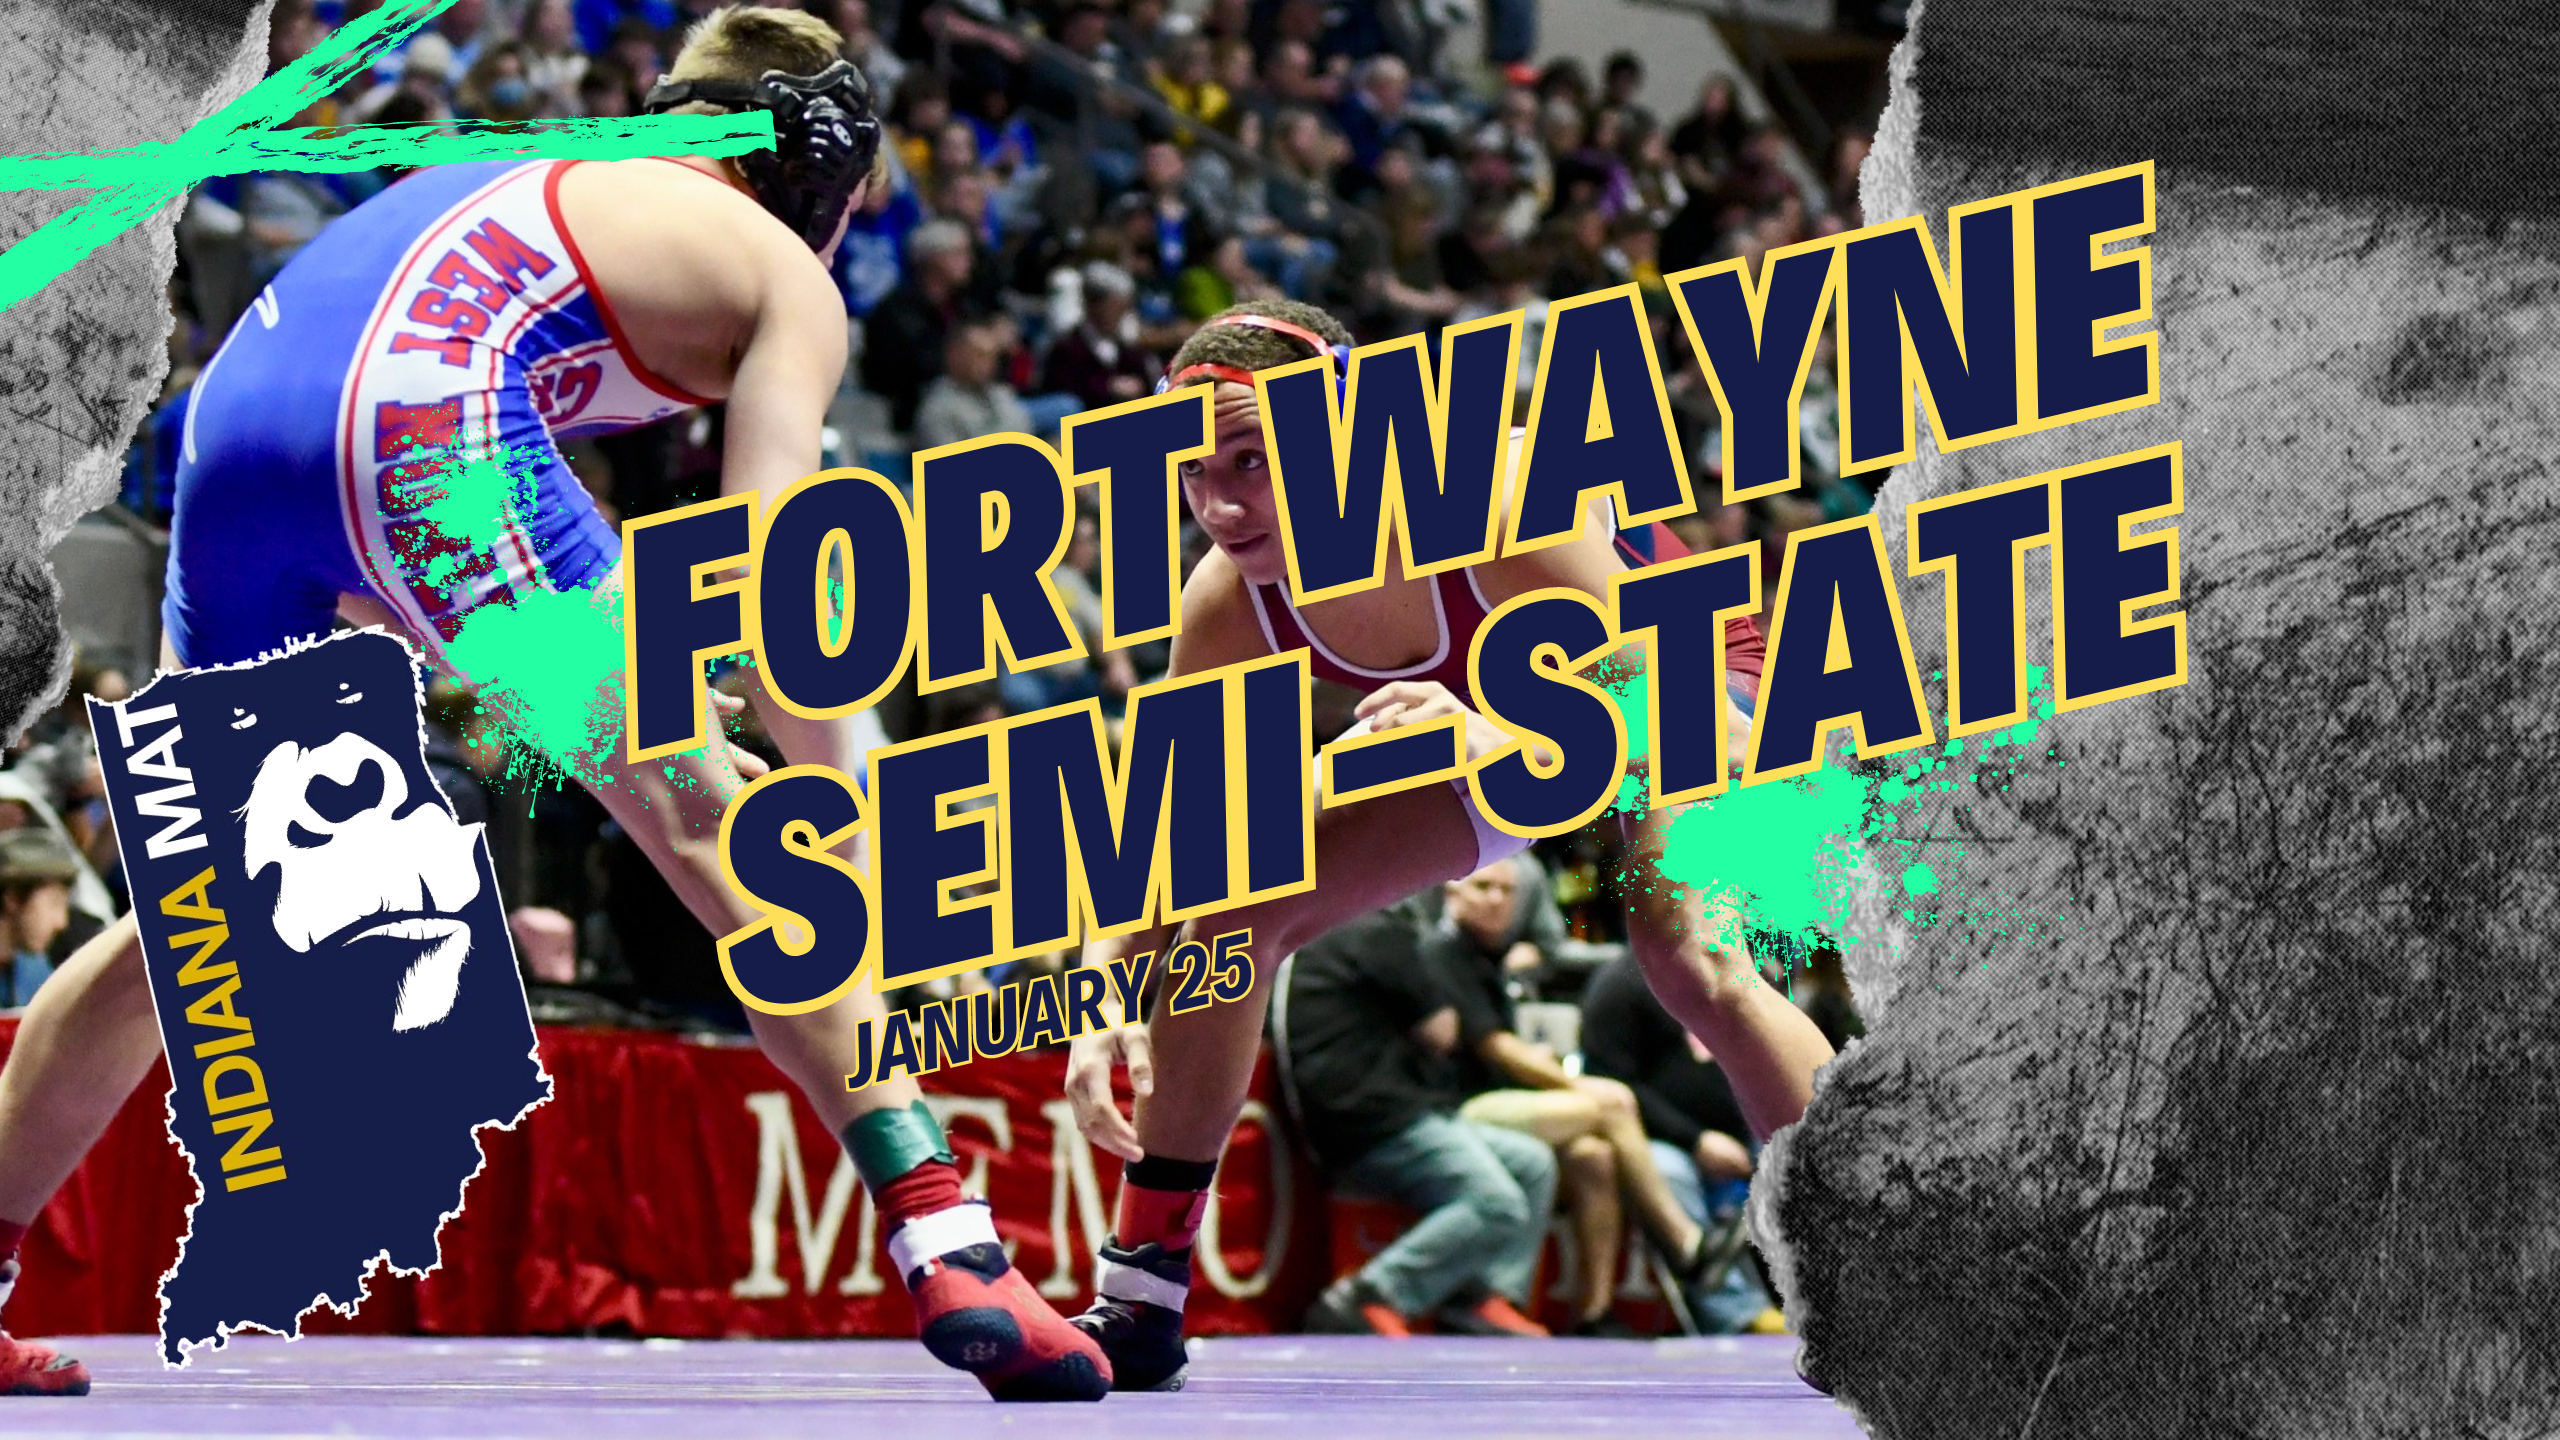 More information about "Fort Wayne Final"